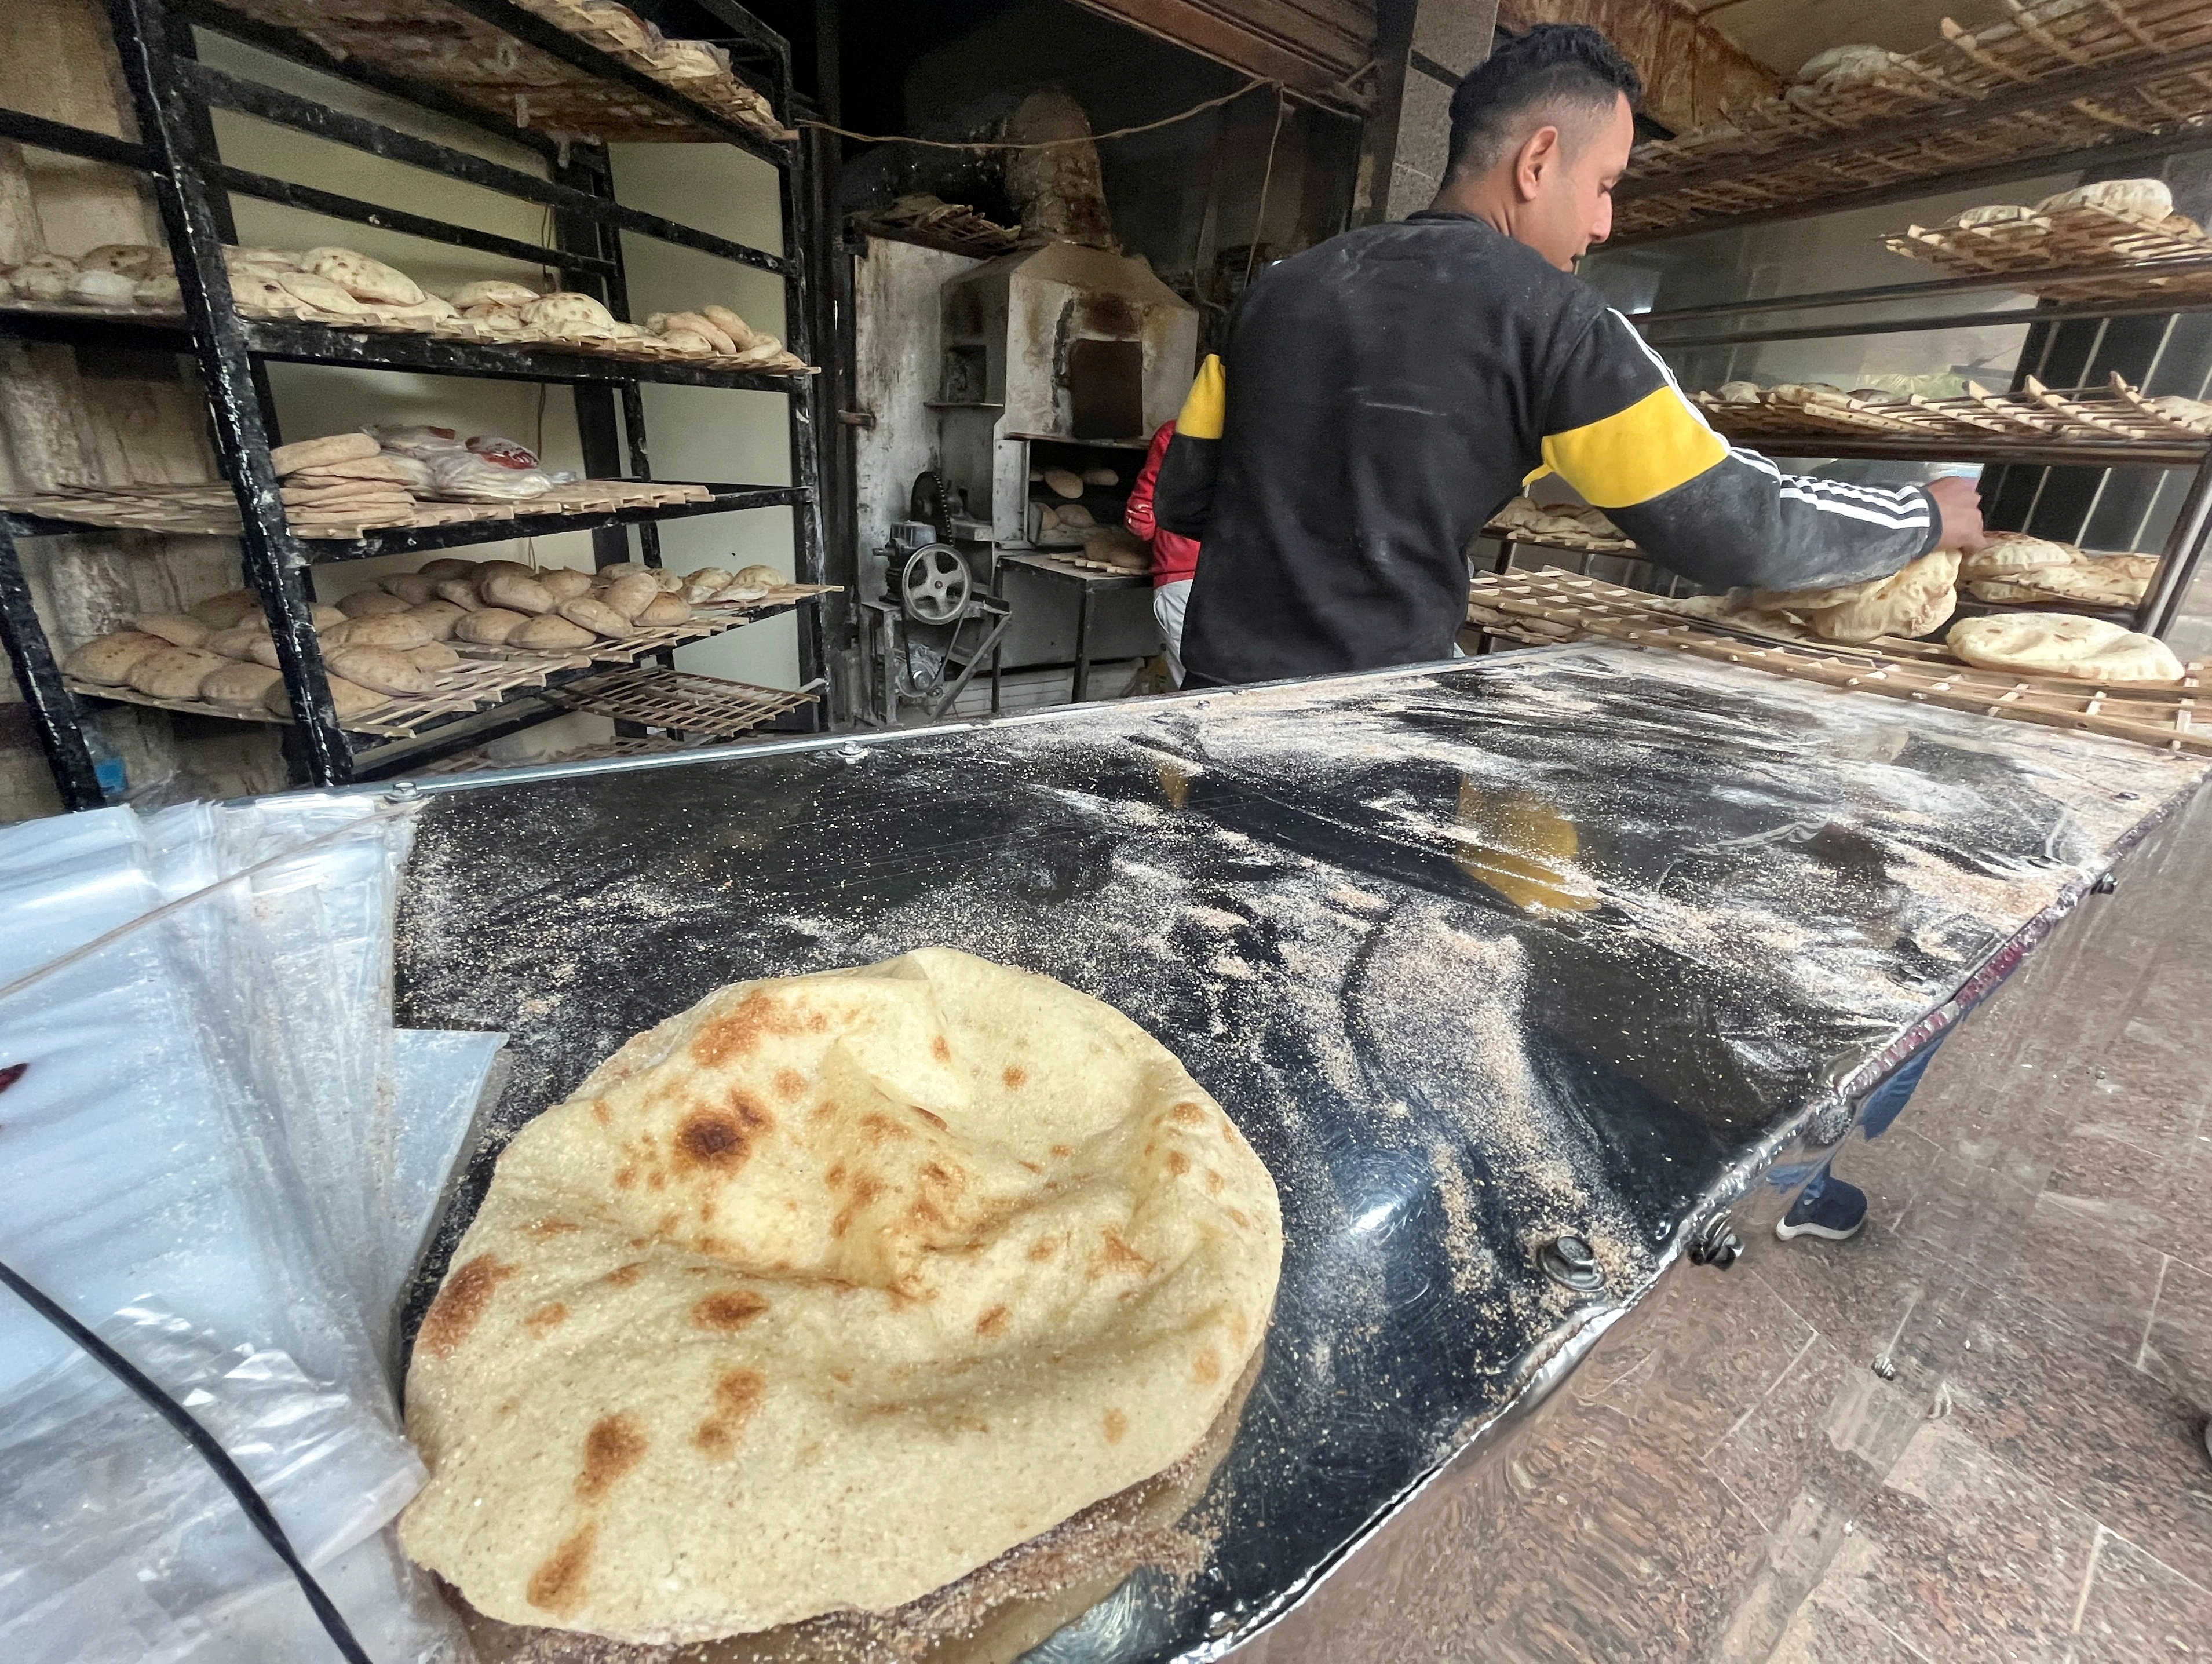 A man sells bread inside a bakery in Maadi, a suburb of Cairo